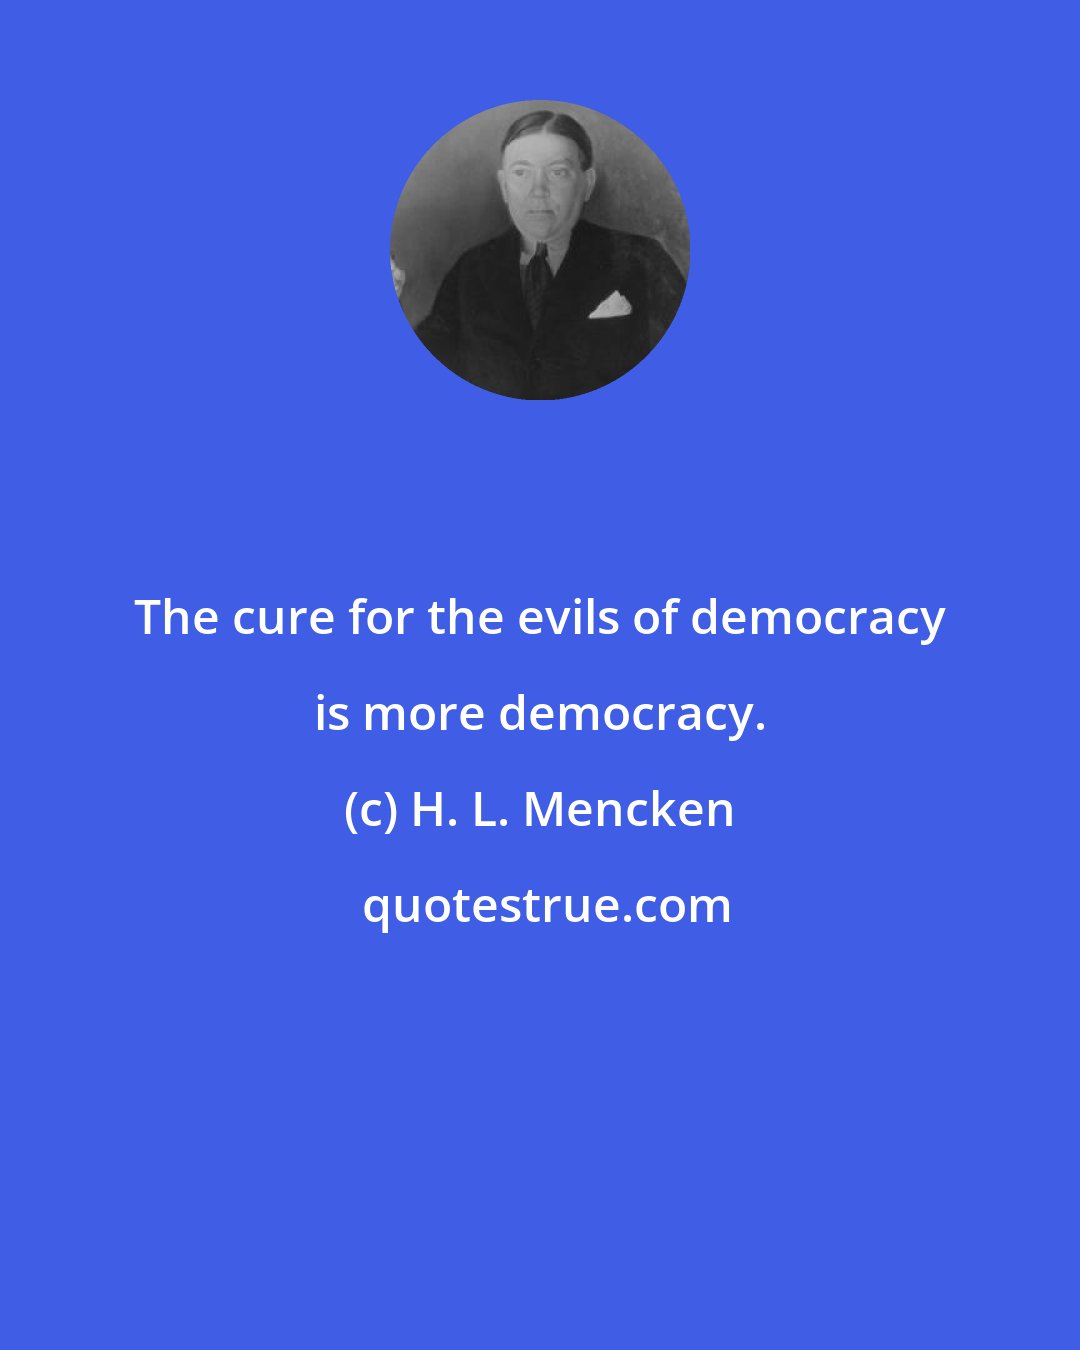 H. L. Mencken: The cure for the evils of democracy is more democracy.